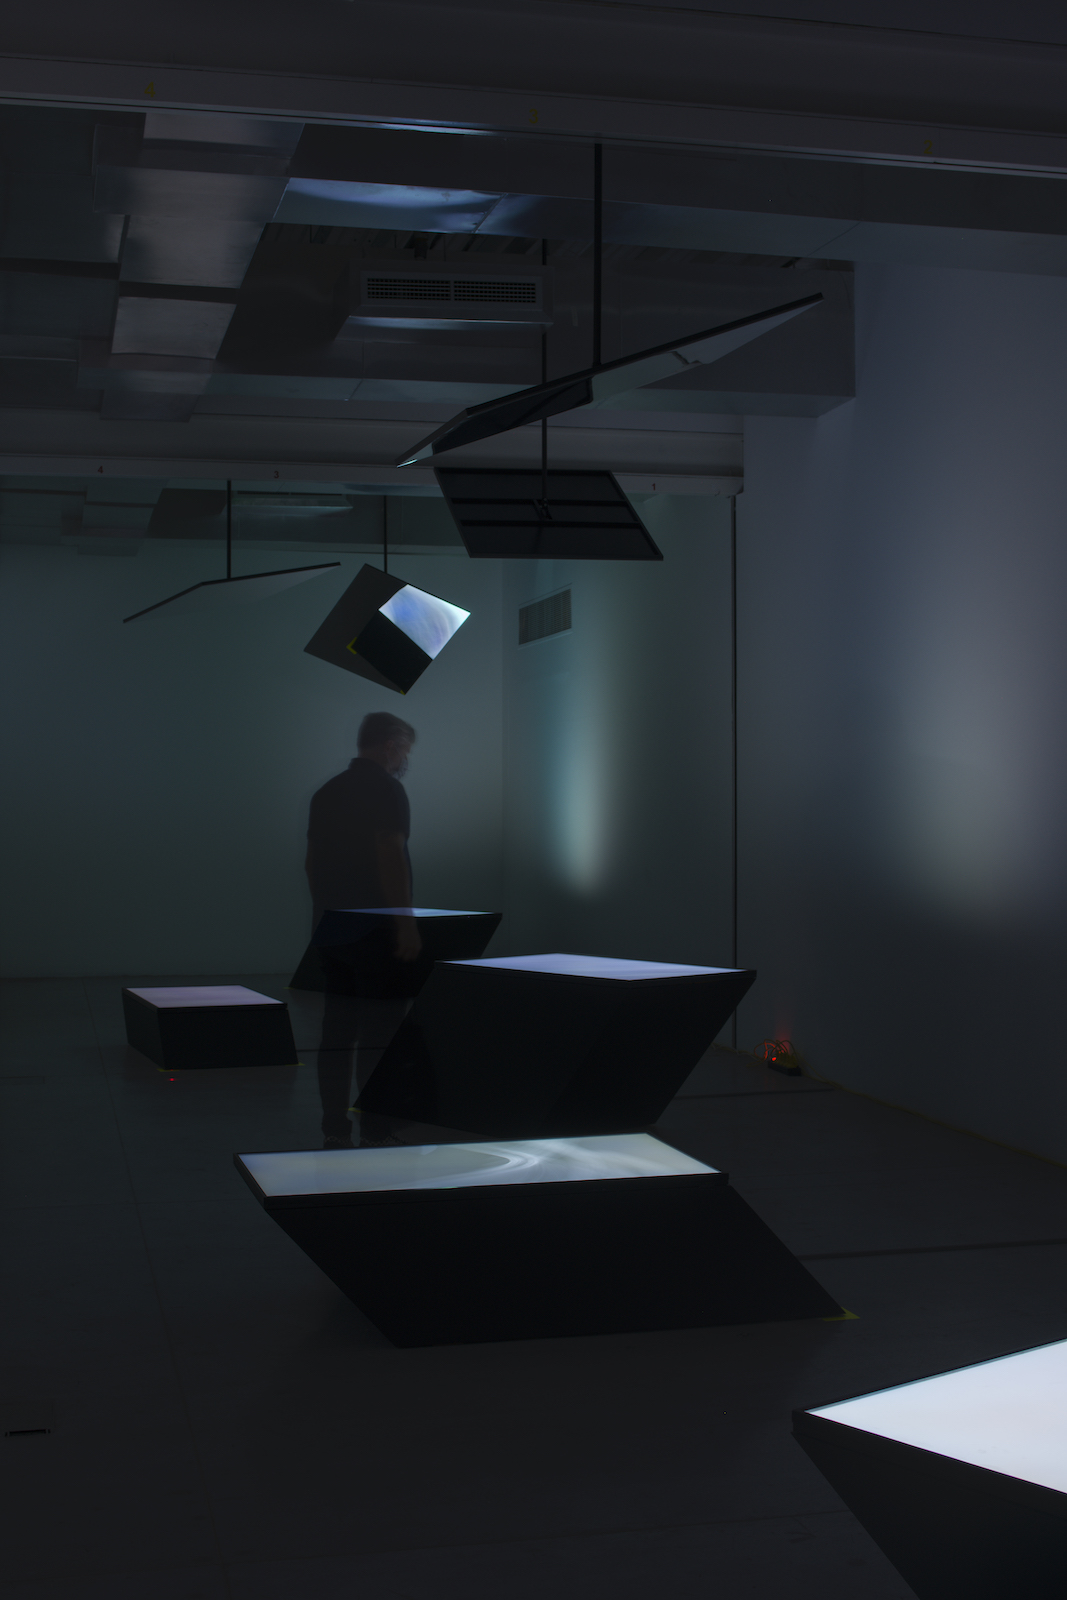 In a dark room, a figure stands among a number of screens facing upwards, shining a pale light as they reflect off four screens or mirrors angled down from the ceiling.